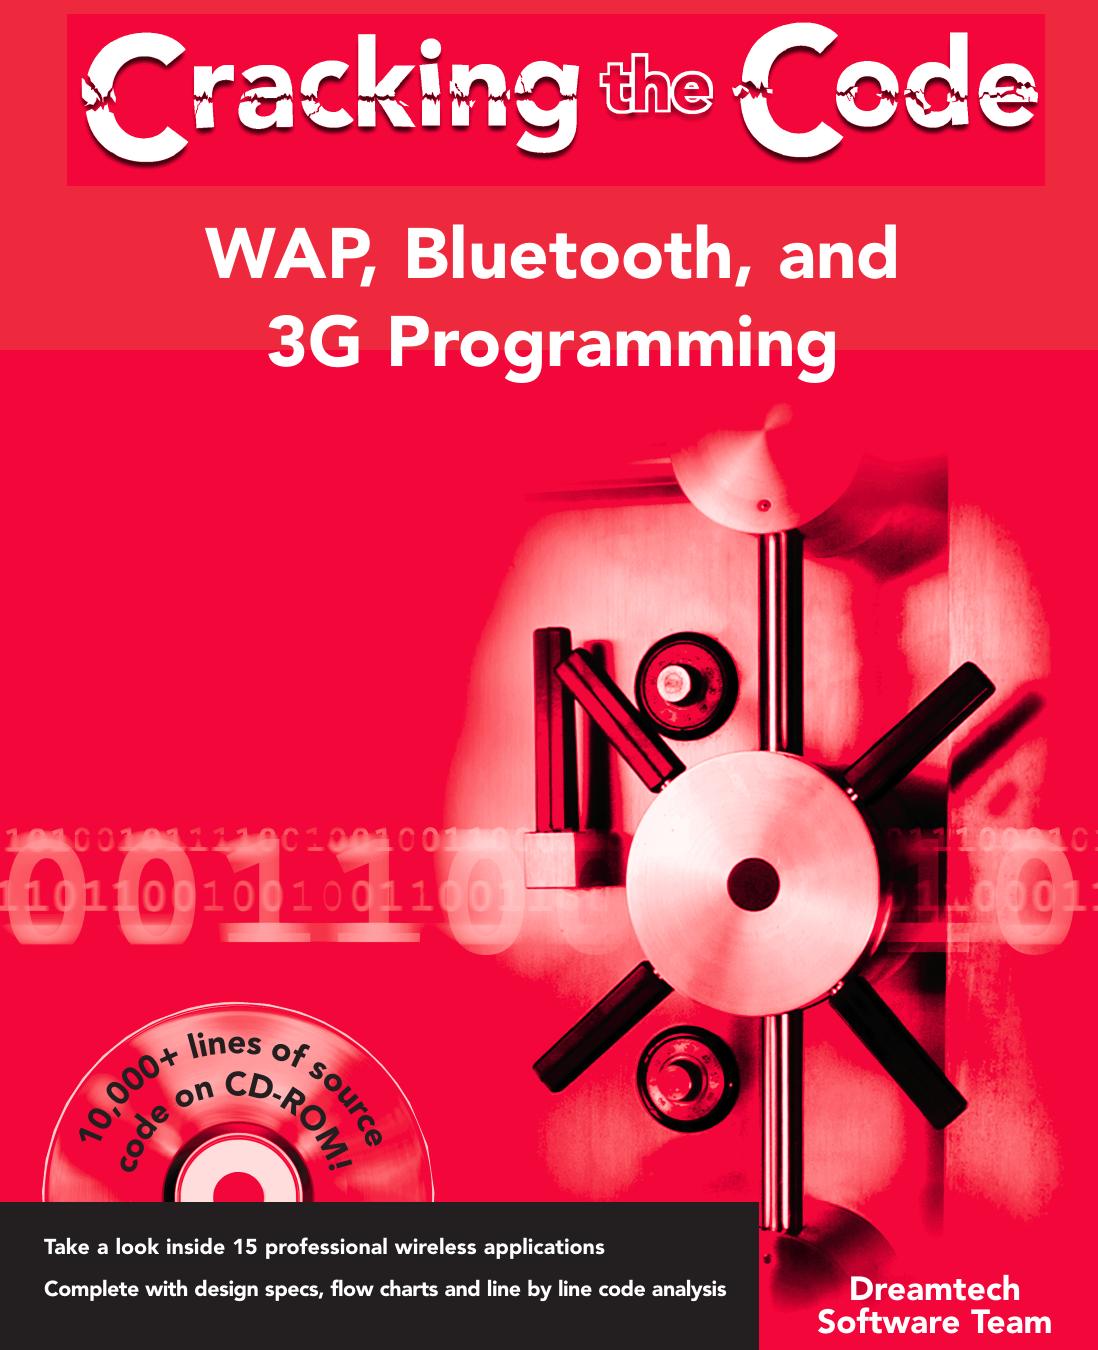 WAP, Bluetooth, and 3G Programming - Cracking the Code by Unknown